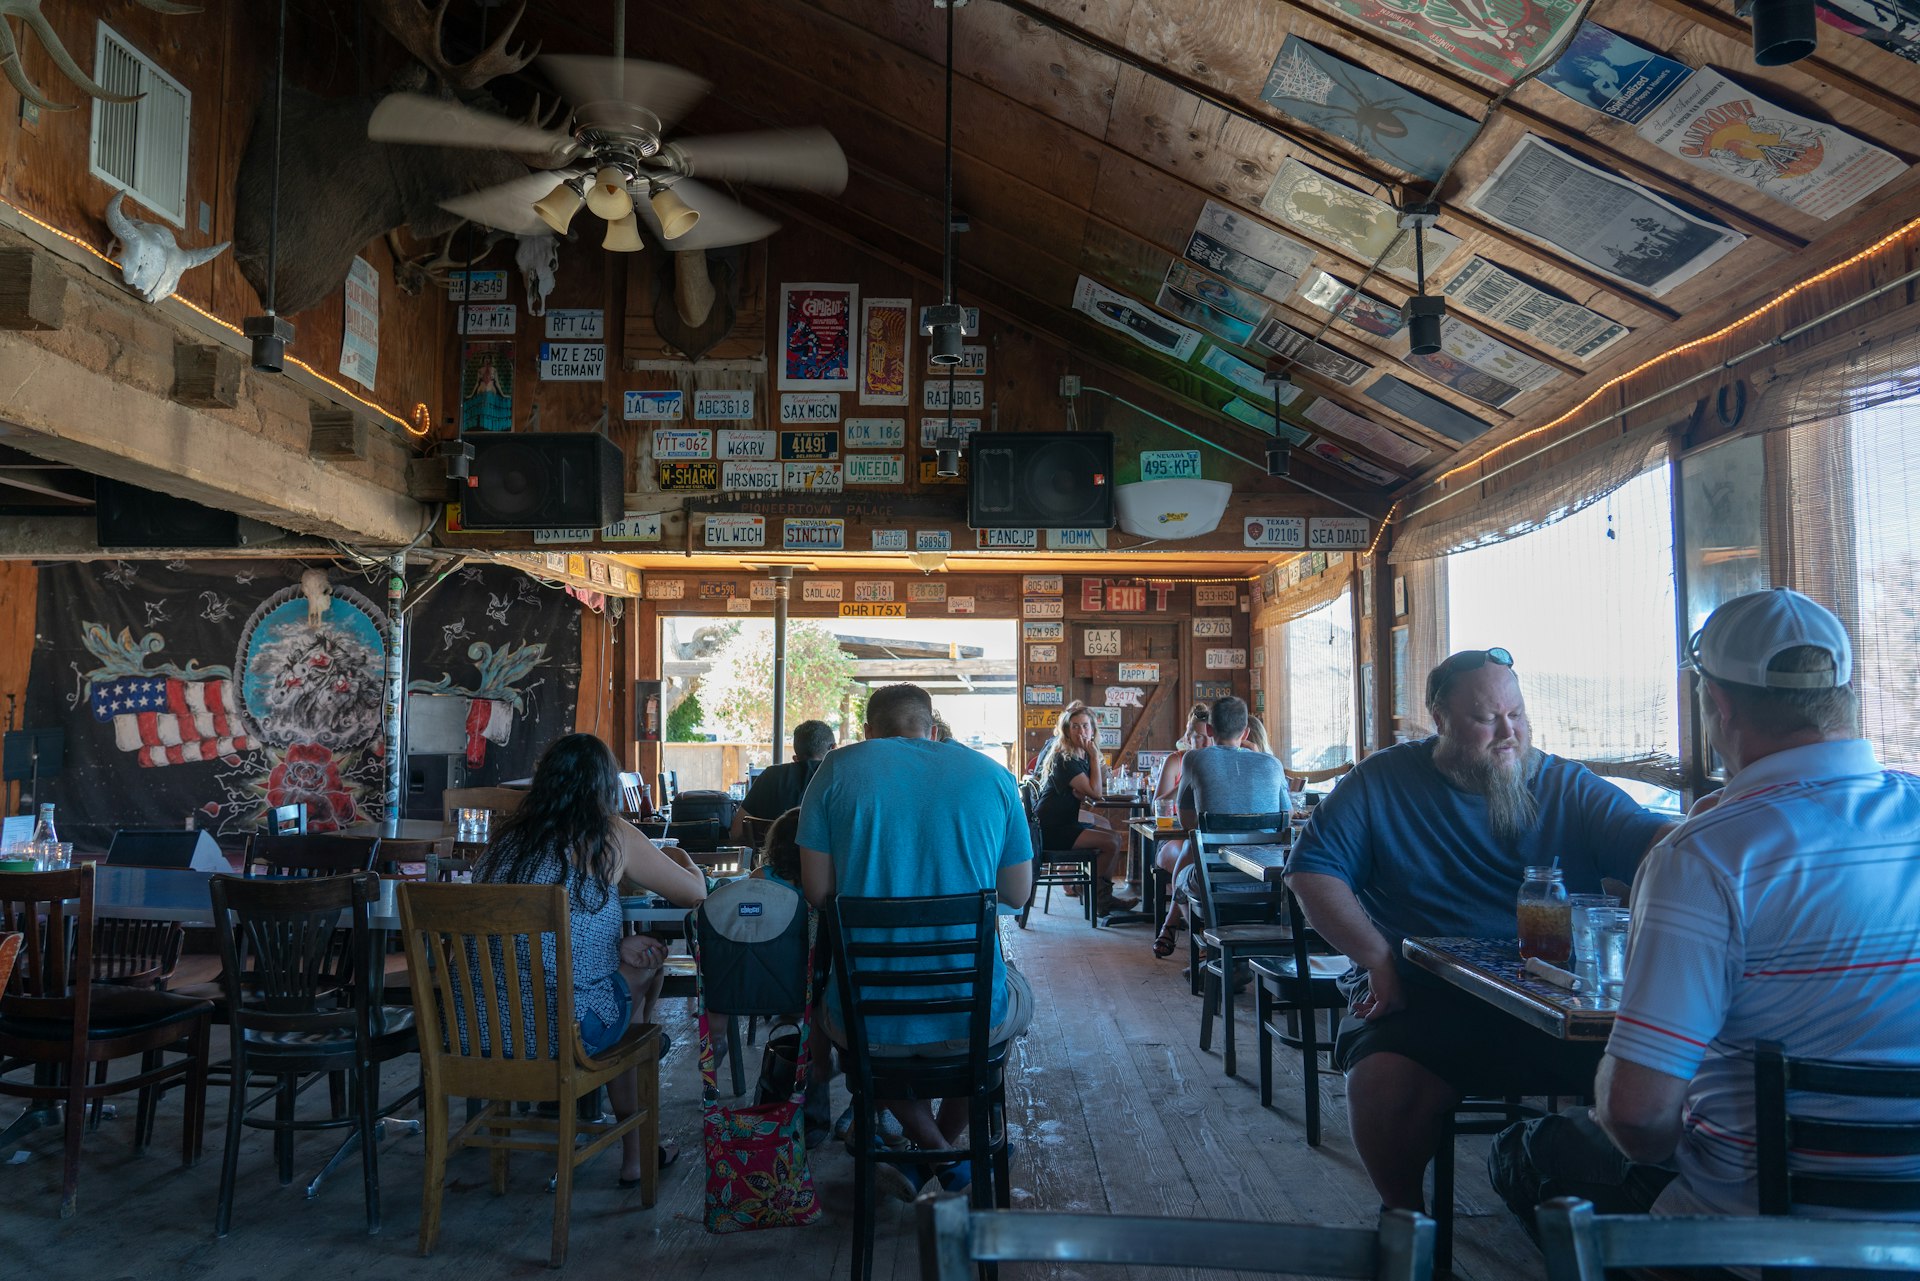 People dining at Pappy & Harriet’s restaurant and music venue, Pioneertown, California, USA